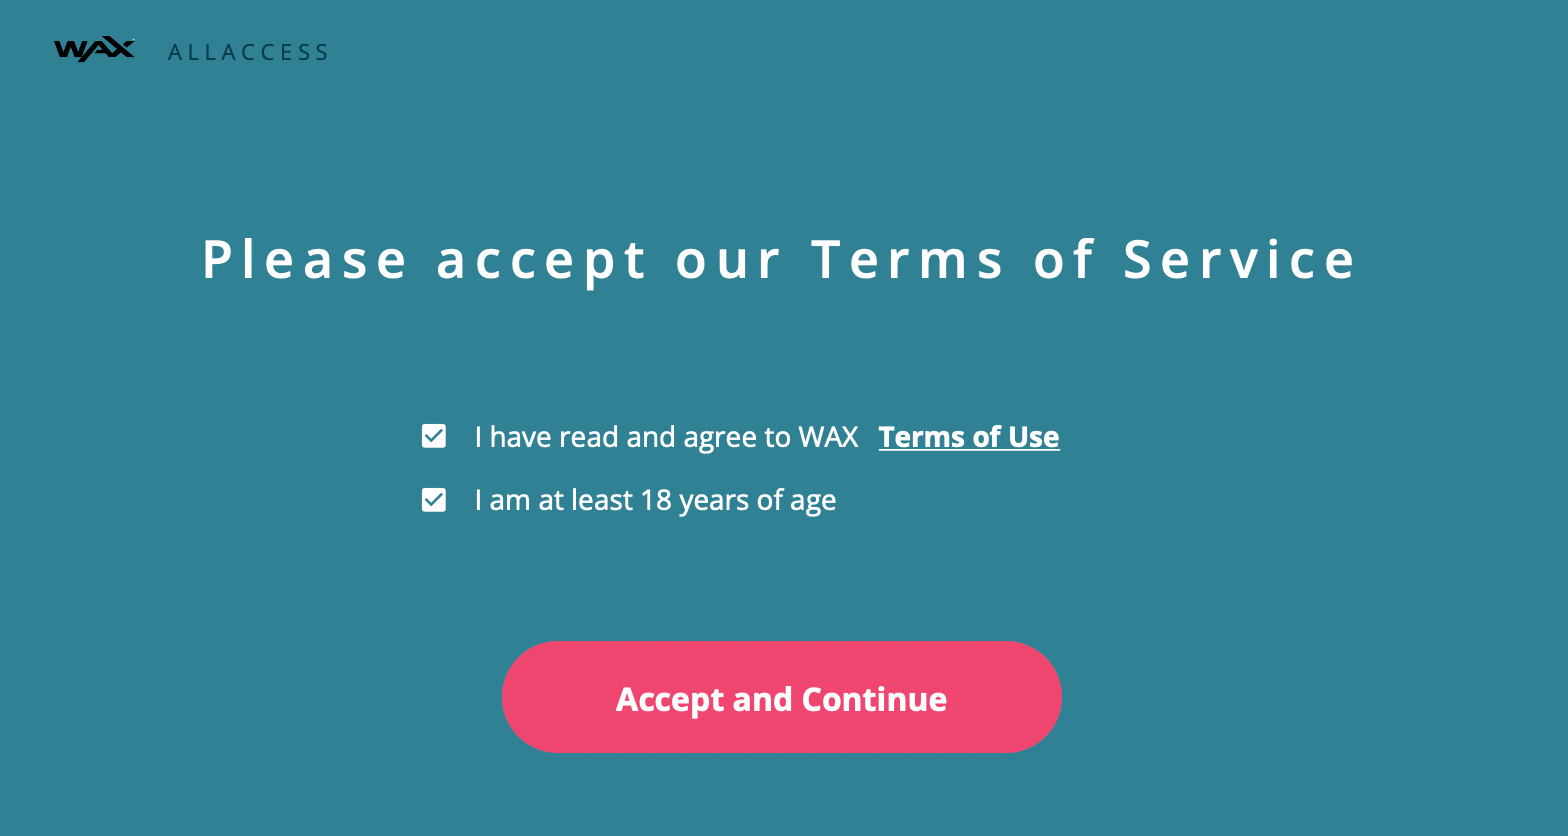 wax wallet accept terms of service - 08